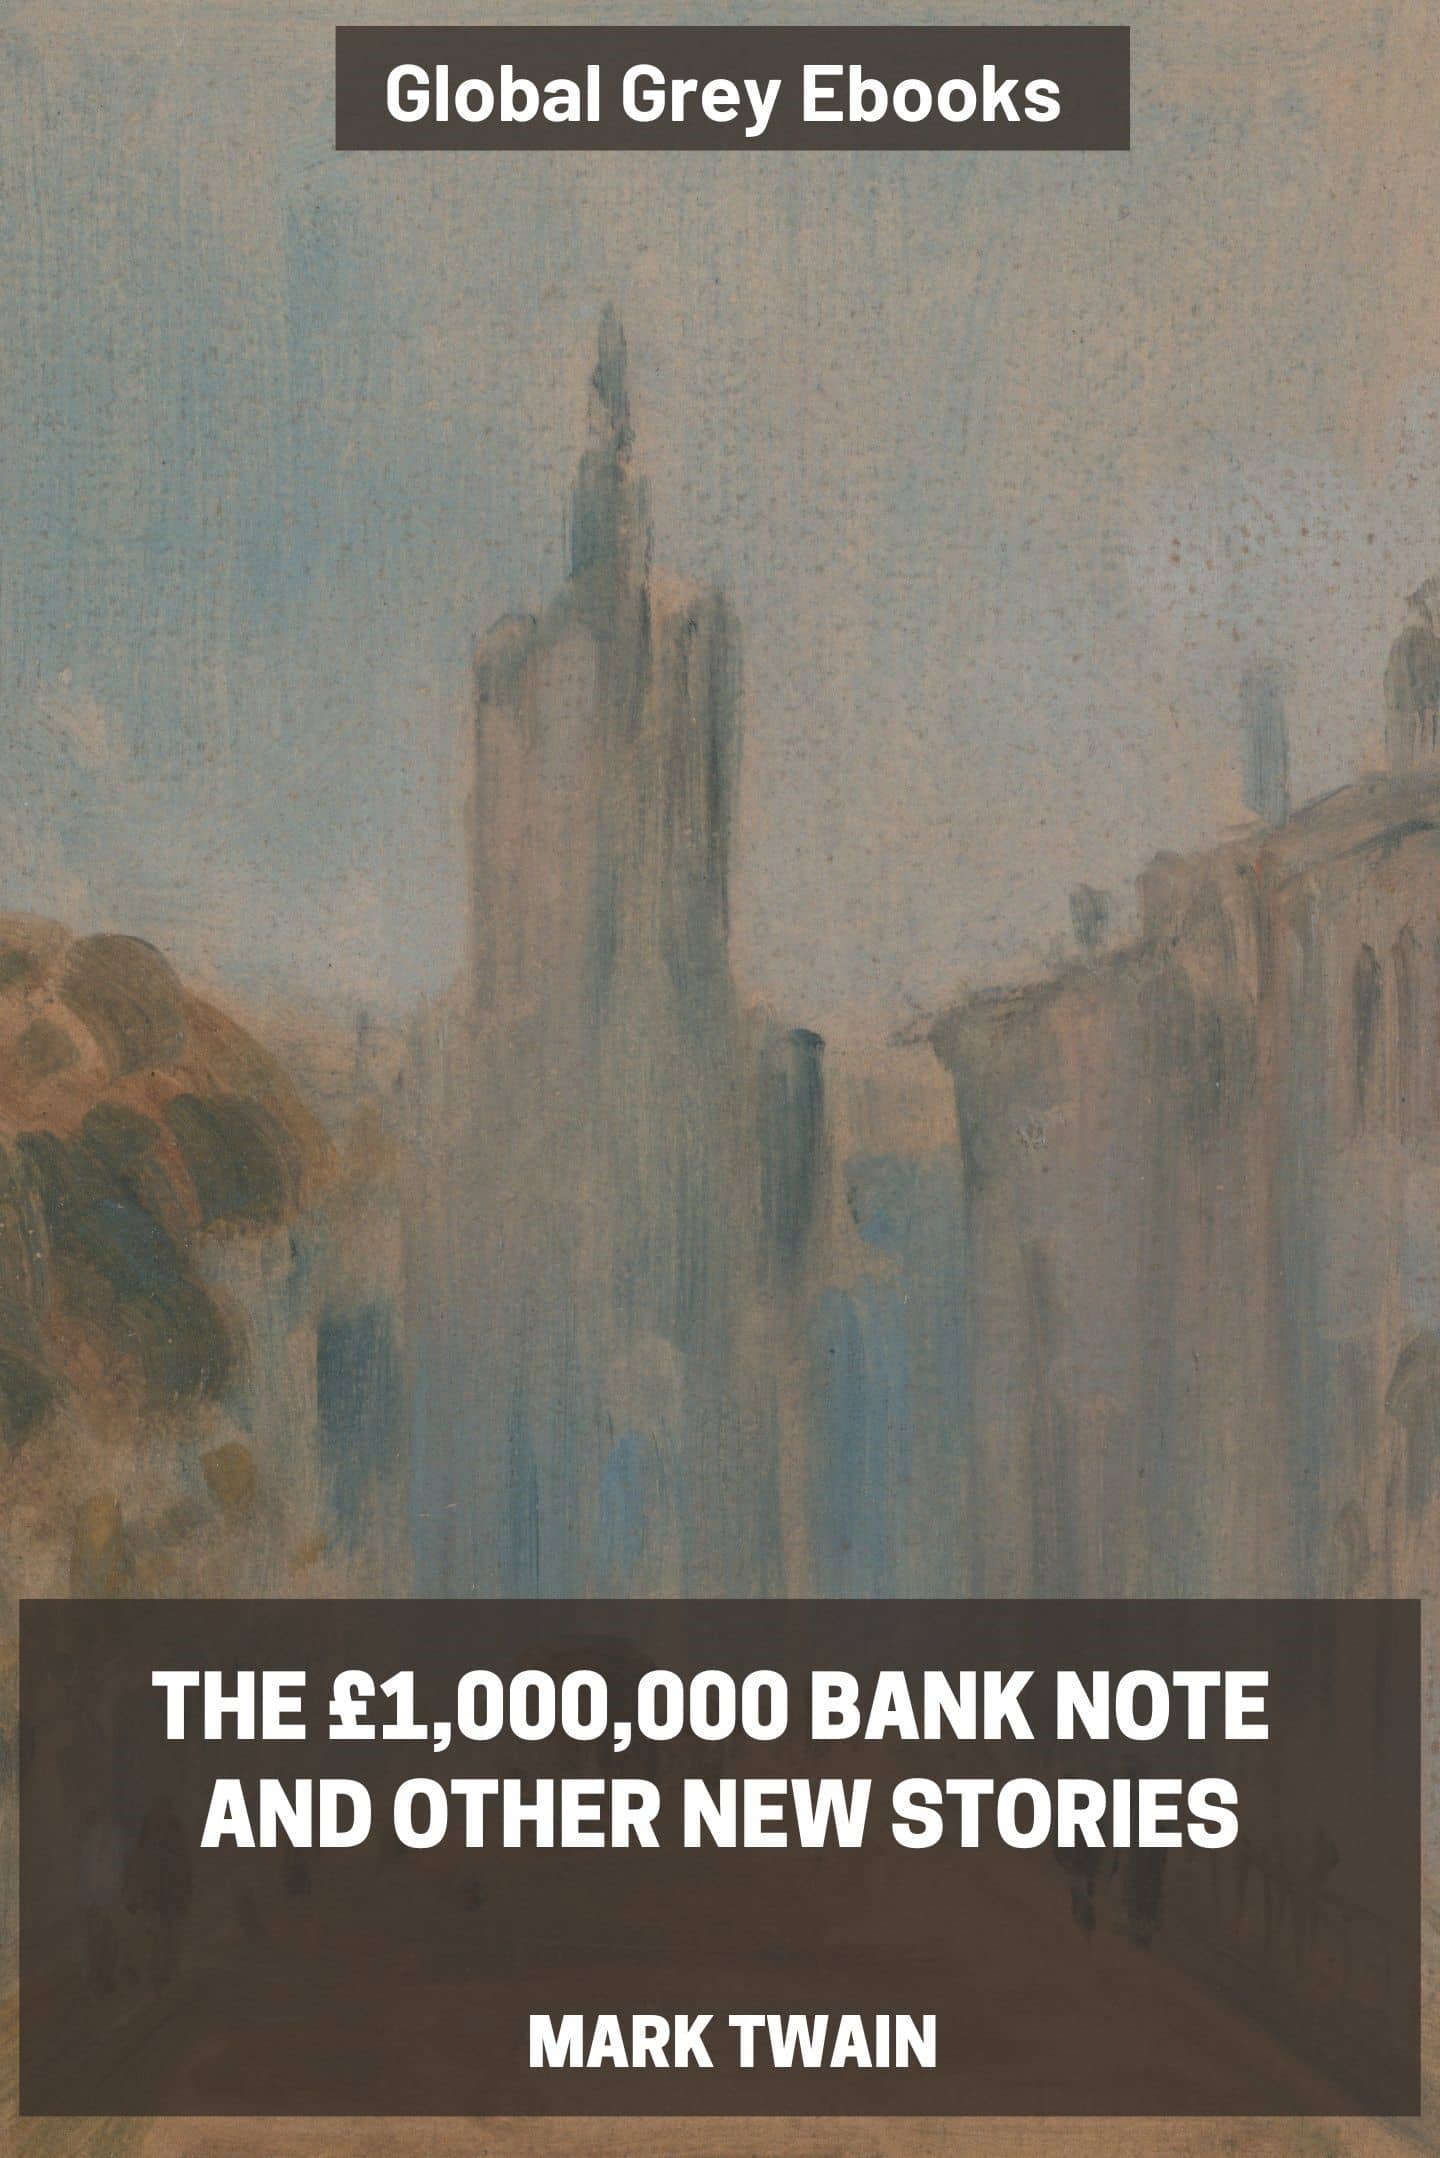 The £1,000,000 Bank Note and Other New Stories, by Mark Twain - Complete text online photo